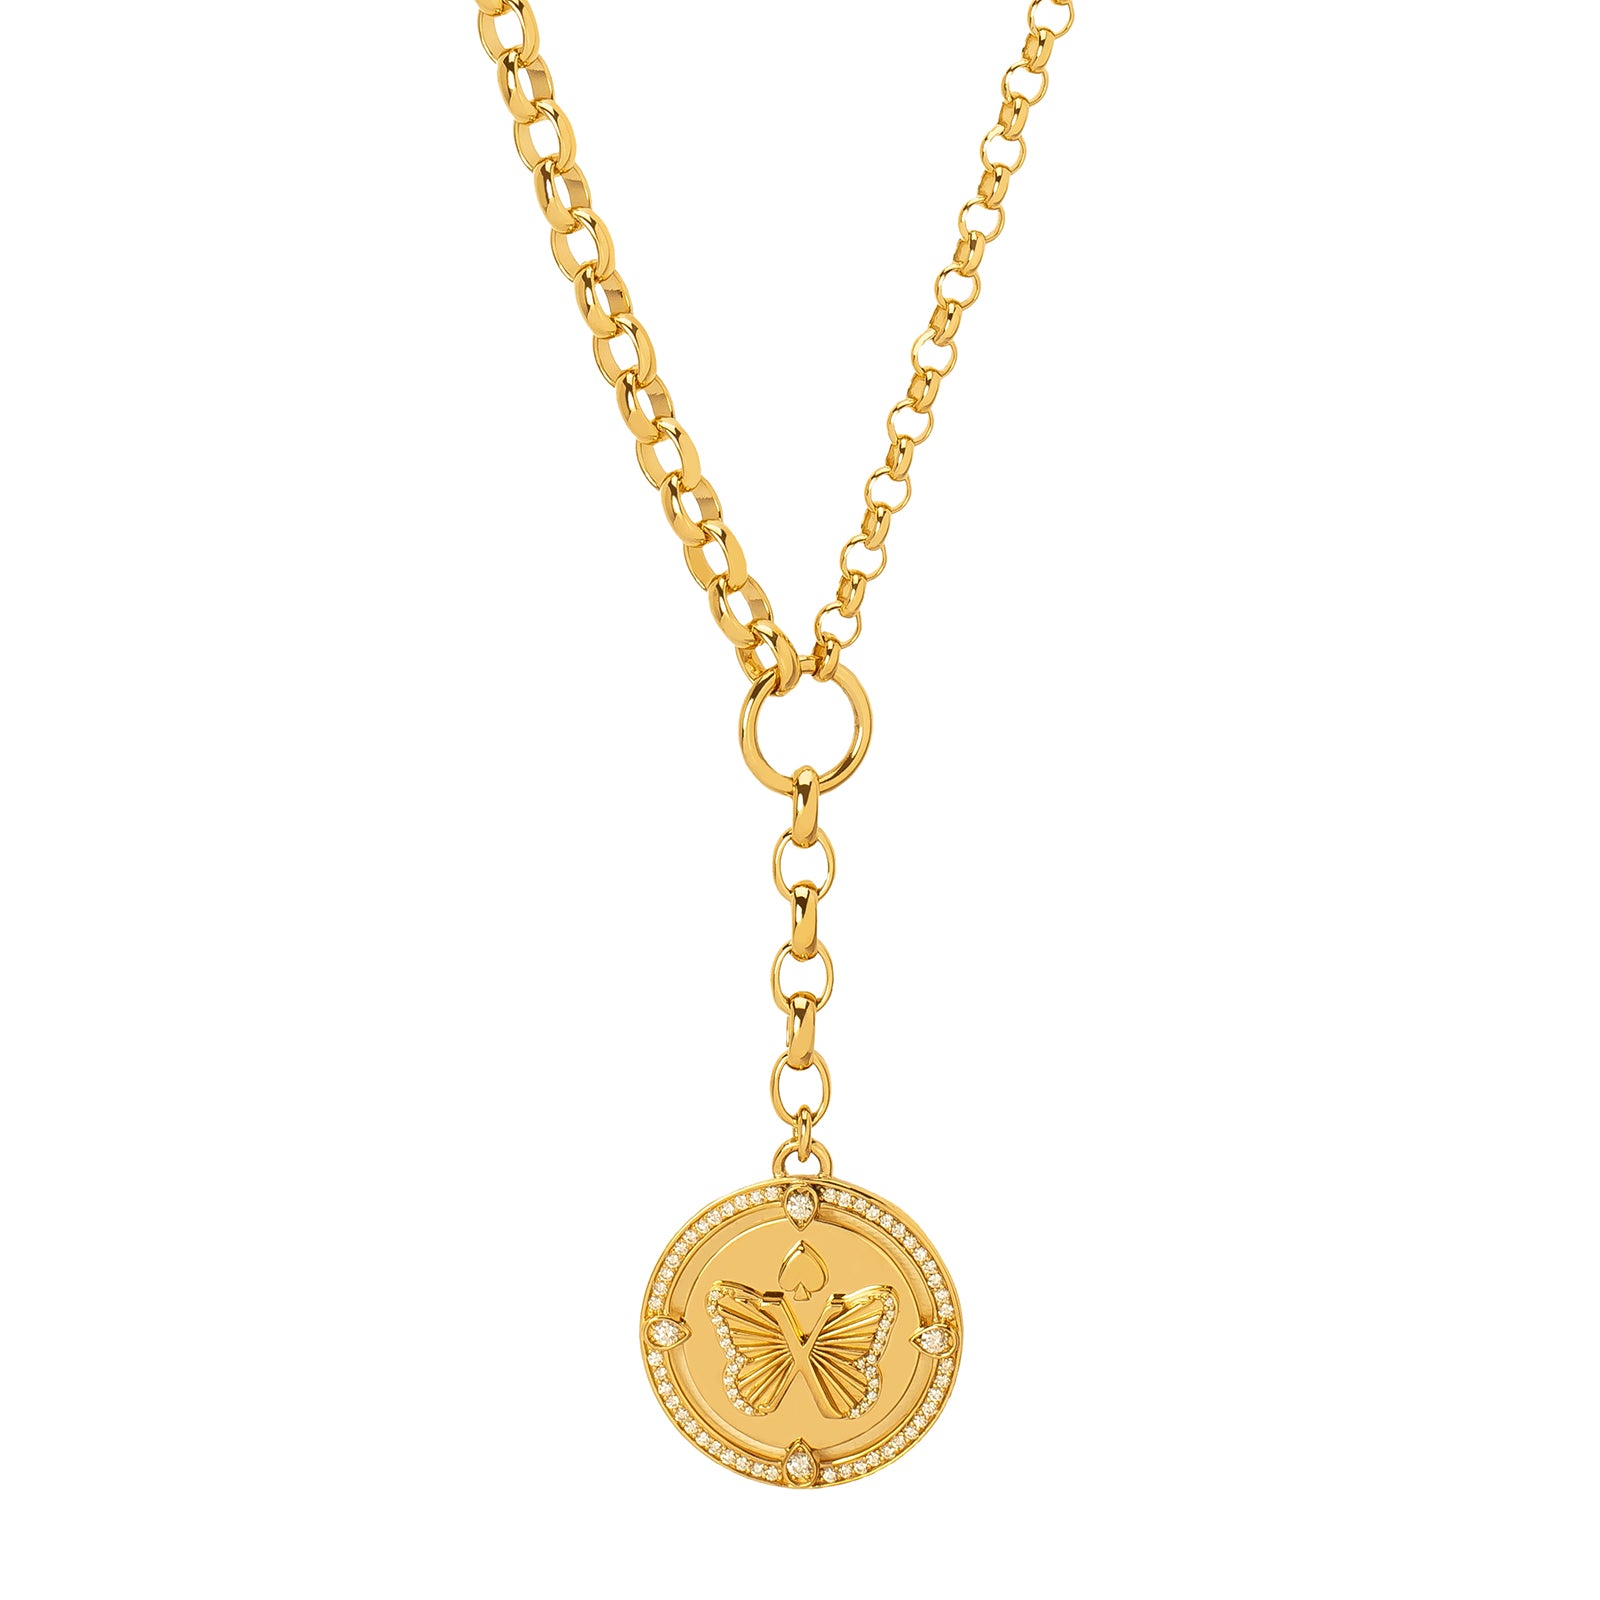 A very Vuitton love token: the new Lockit jewels from Louis Vuitton